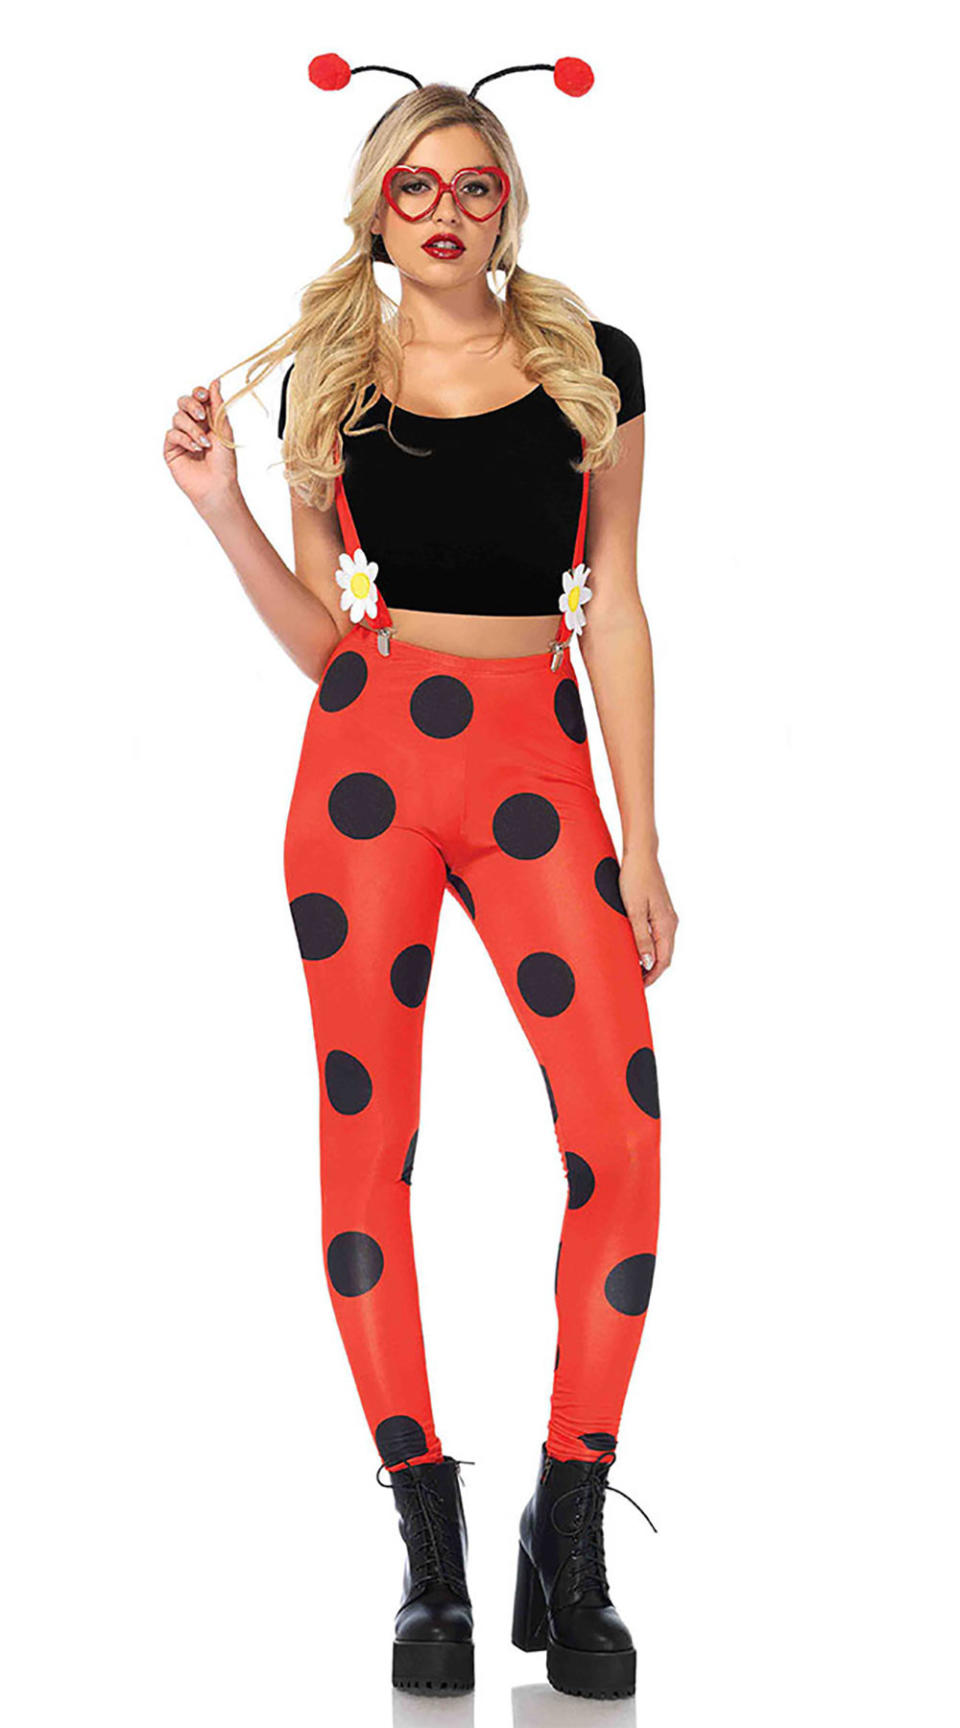 Looking for a sexy costume for roleplay that doesn't involve wearing rubber? You could certainly dress up as a&nbsp;<a href="https://www.yandy.com/Love-Bug-Costume.php" target="_blank">love bug</a> before romancing your sweetie. Think of all the romantic things you can say to each other in between reminding your Valentine, "I'm a love bug!"